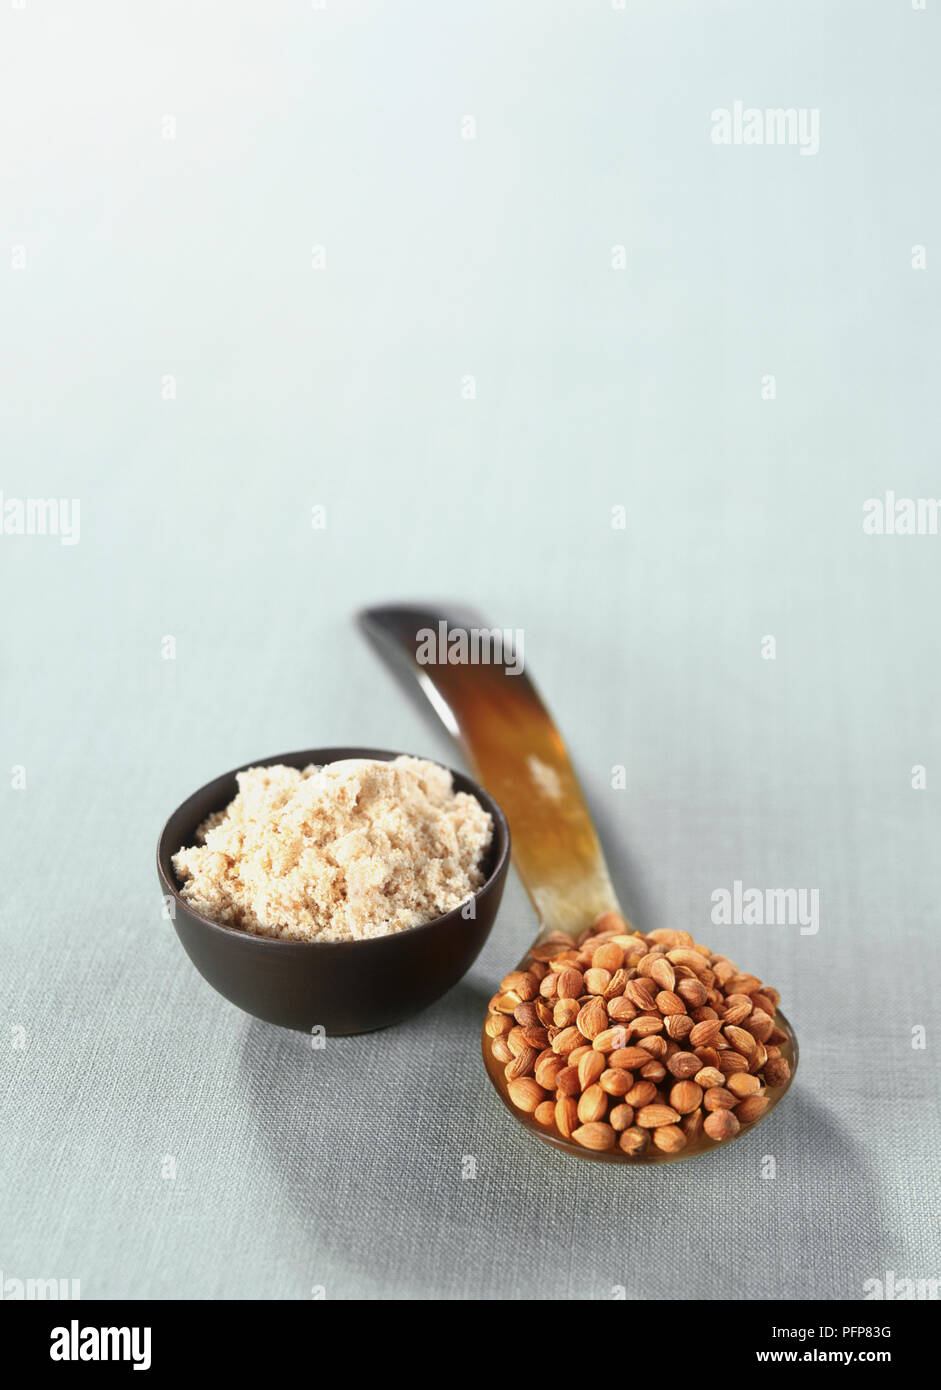 Prunus mahaleb (St. Lucie Cherry), ground seed kernels in bowl and kernels on spoon, close-up Stock Photo